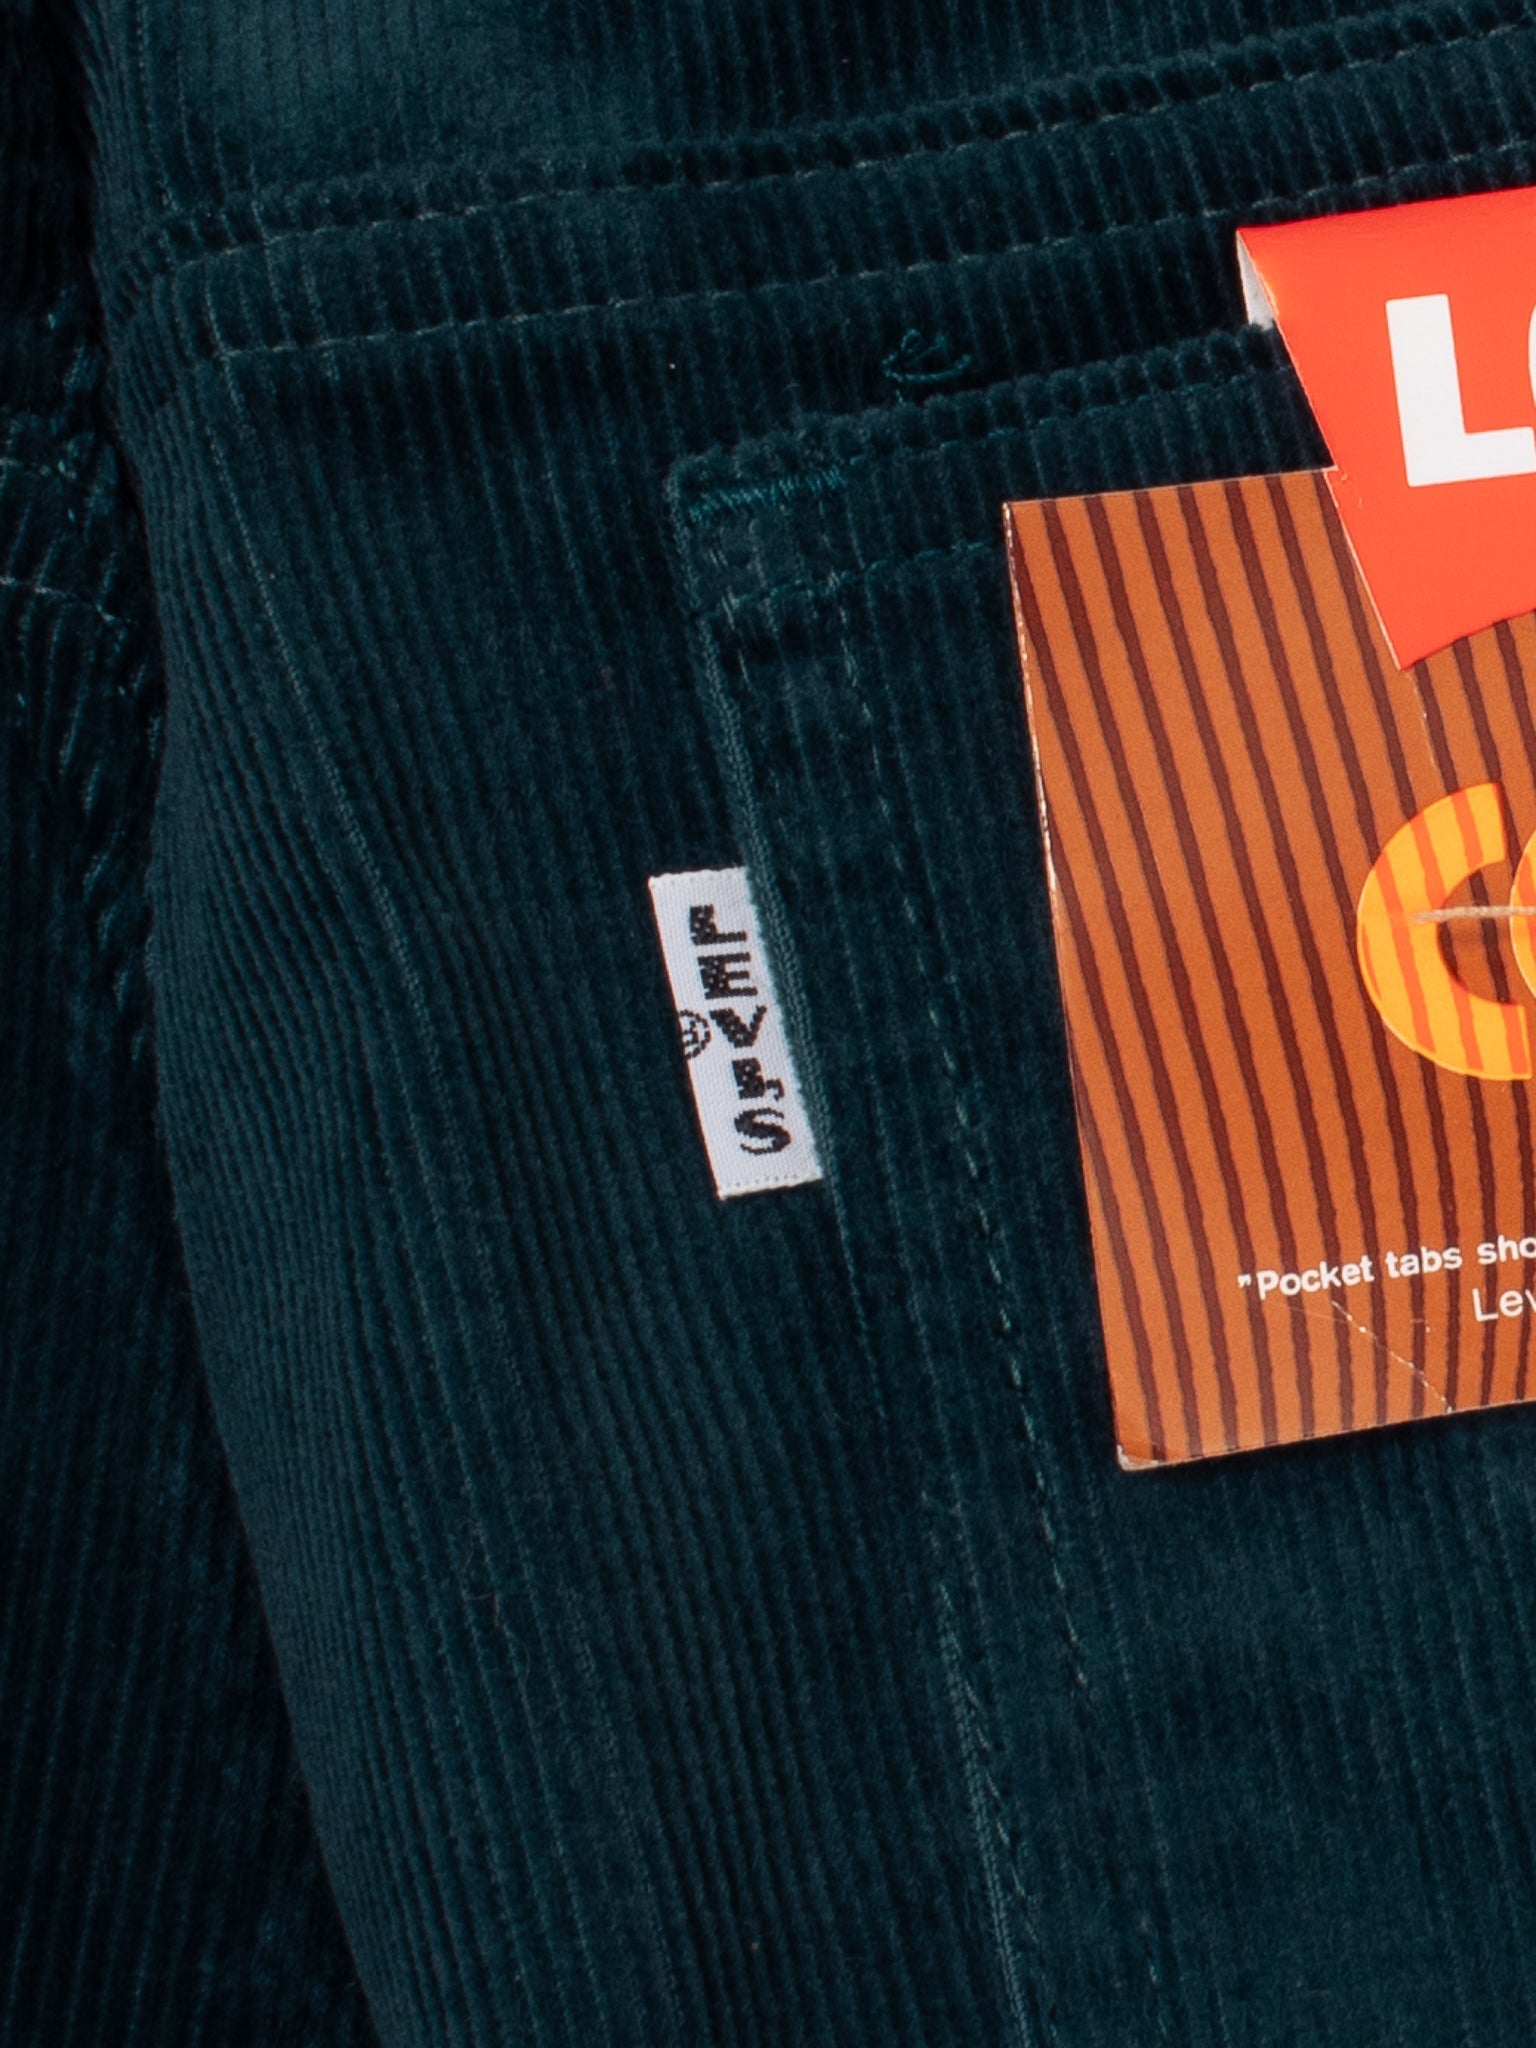 pants & trousers 60s Levi's 644 Cord Flares - W30